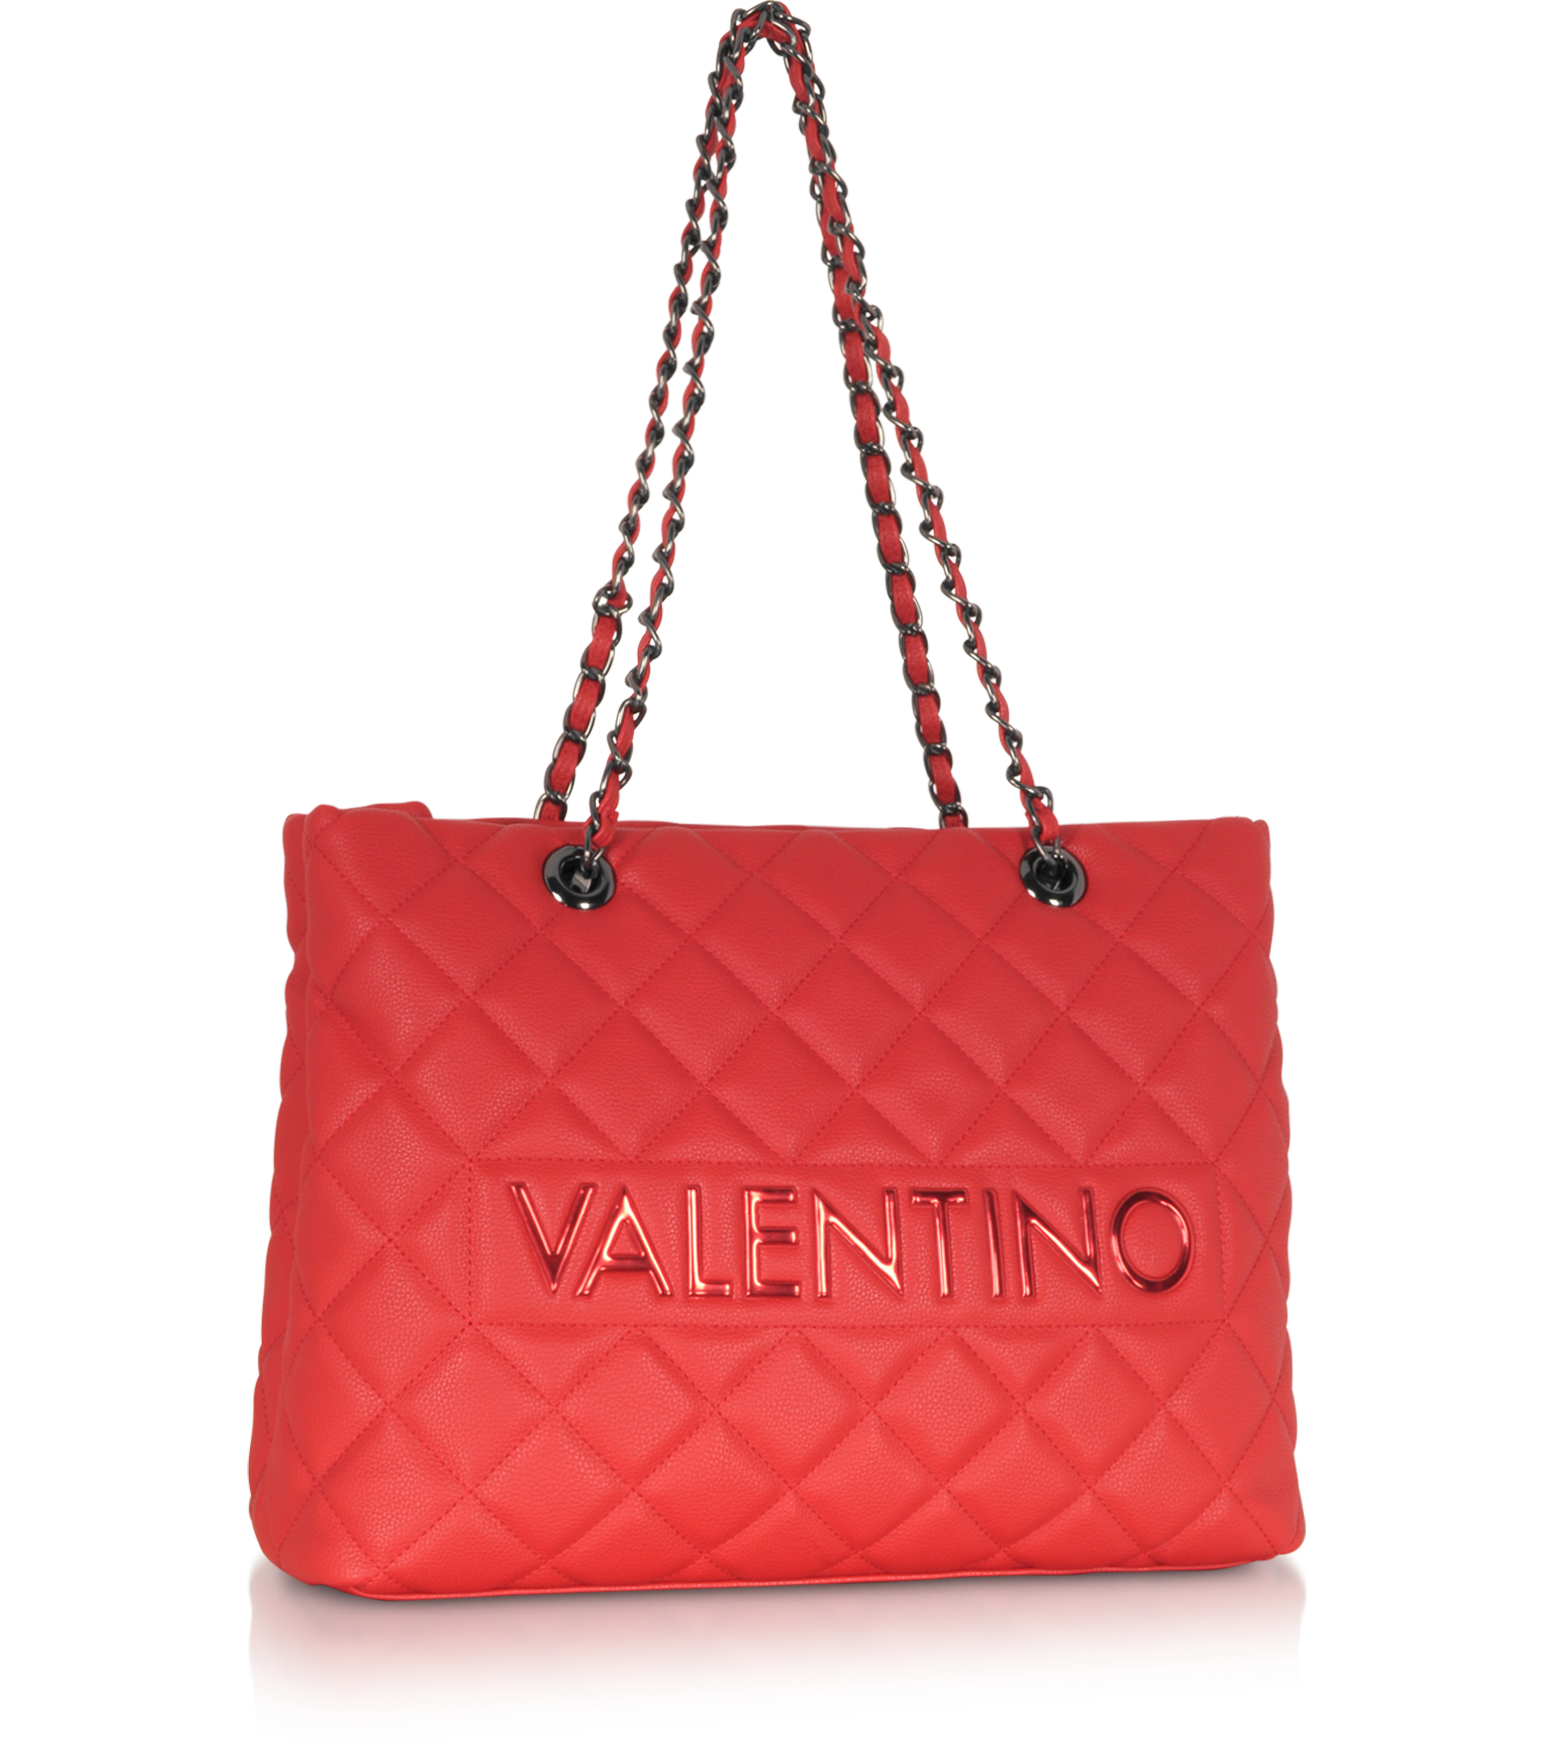 VALENTINO LEATHER QUILTED HANDBAG BY MARIO VALENTINO SPA LARGE Tote  Metallic Red